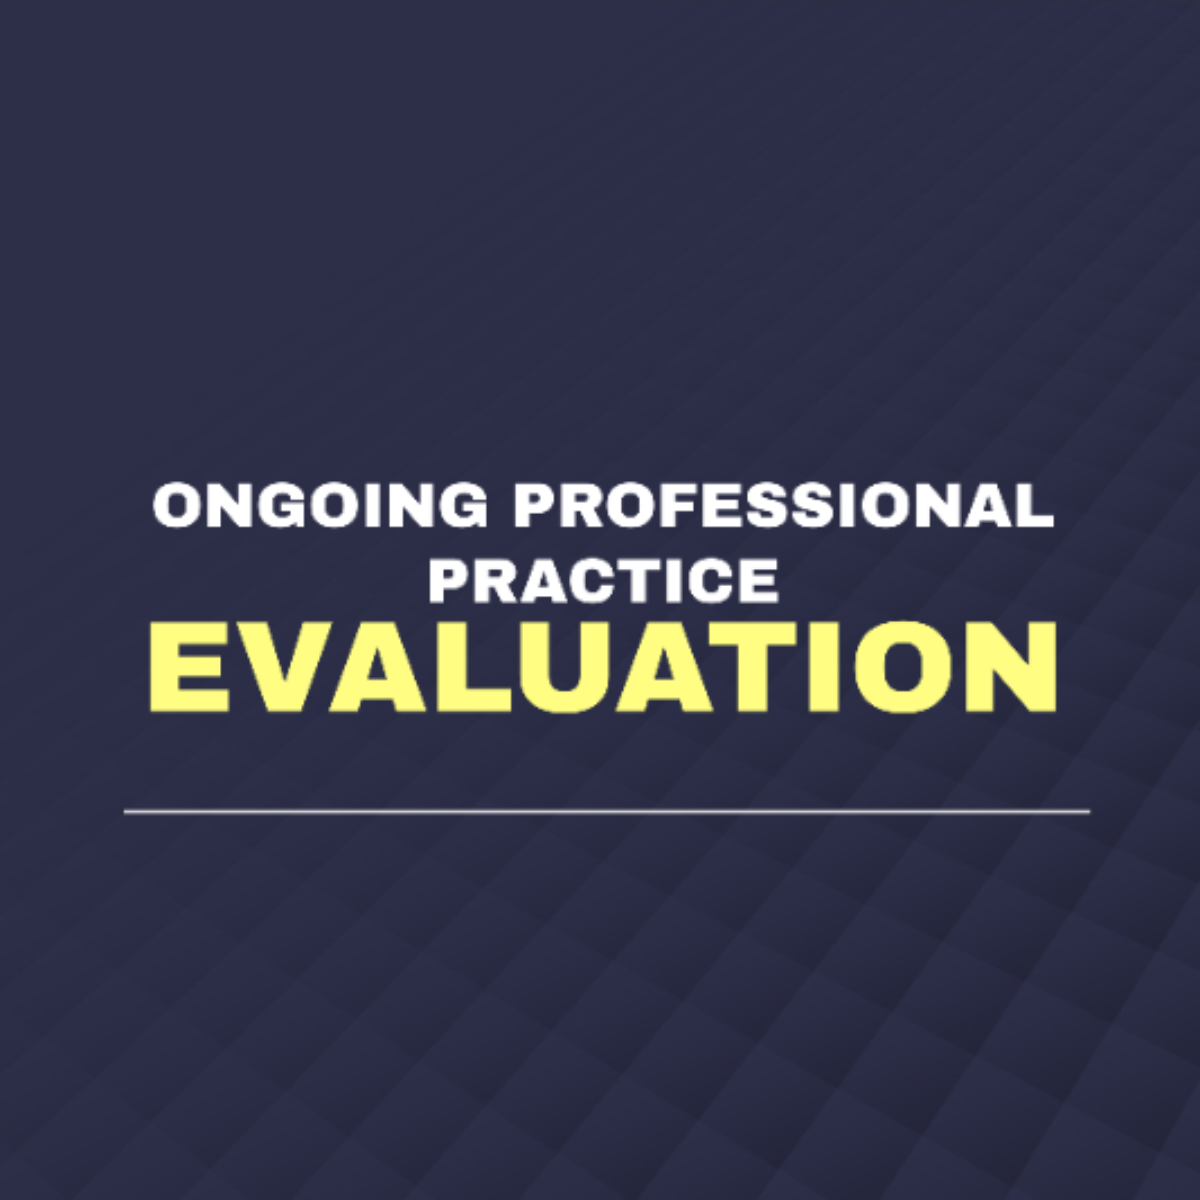 Ongoing Professional Practice Evaluation Template